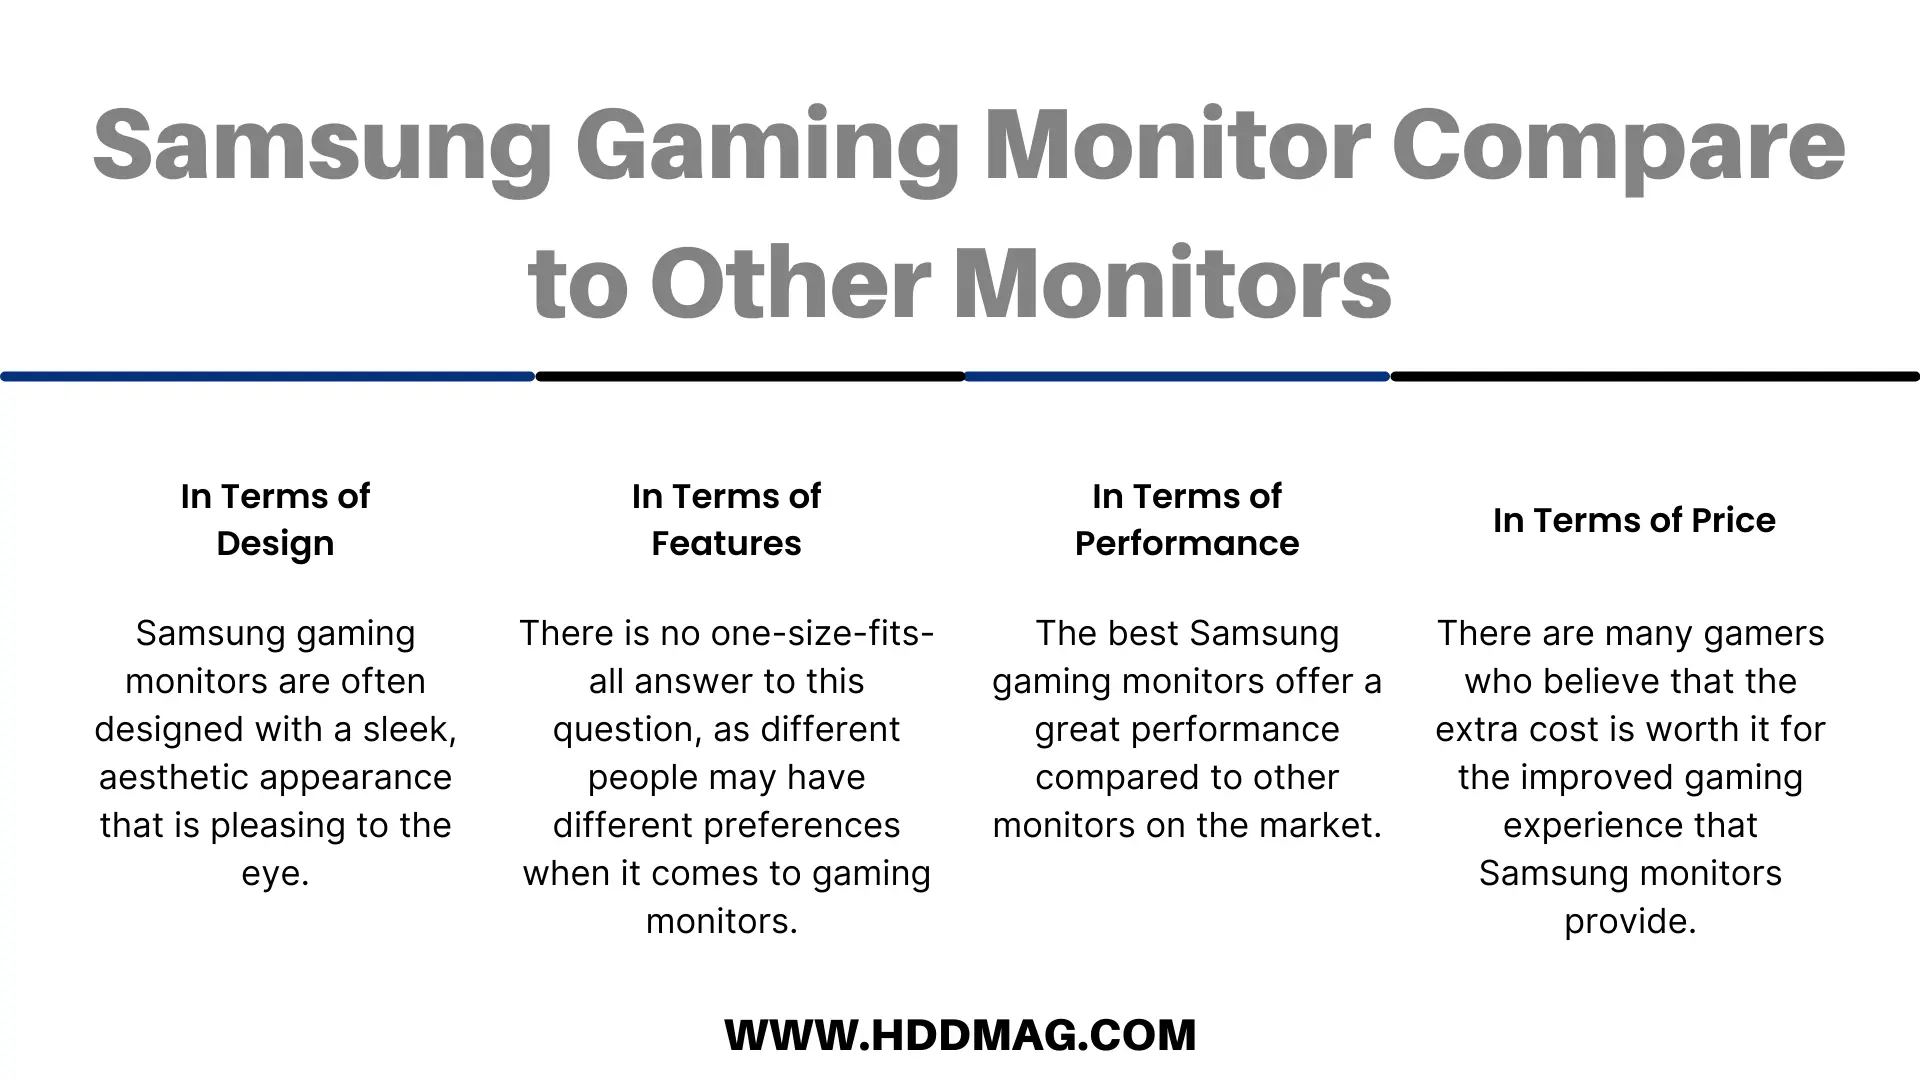 Samsung Gaming Monitor Compare to Other Monitors